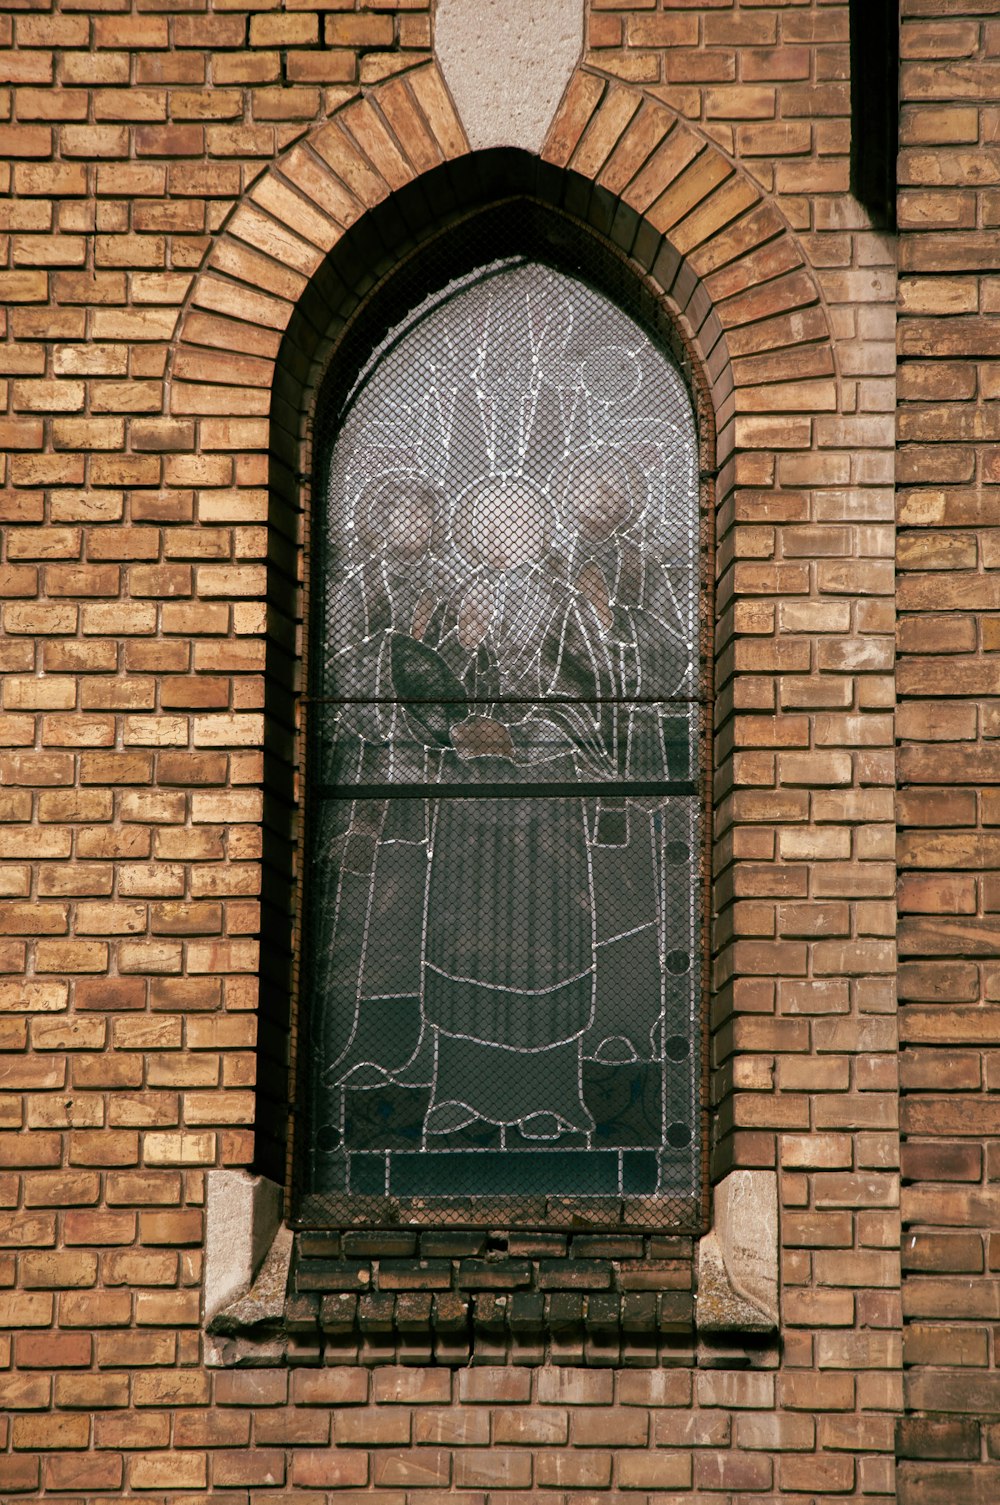 a brick building with a stained glass window